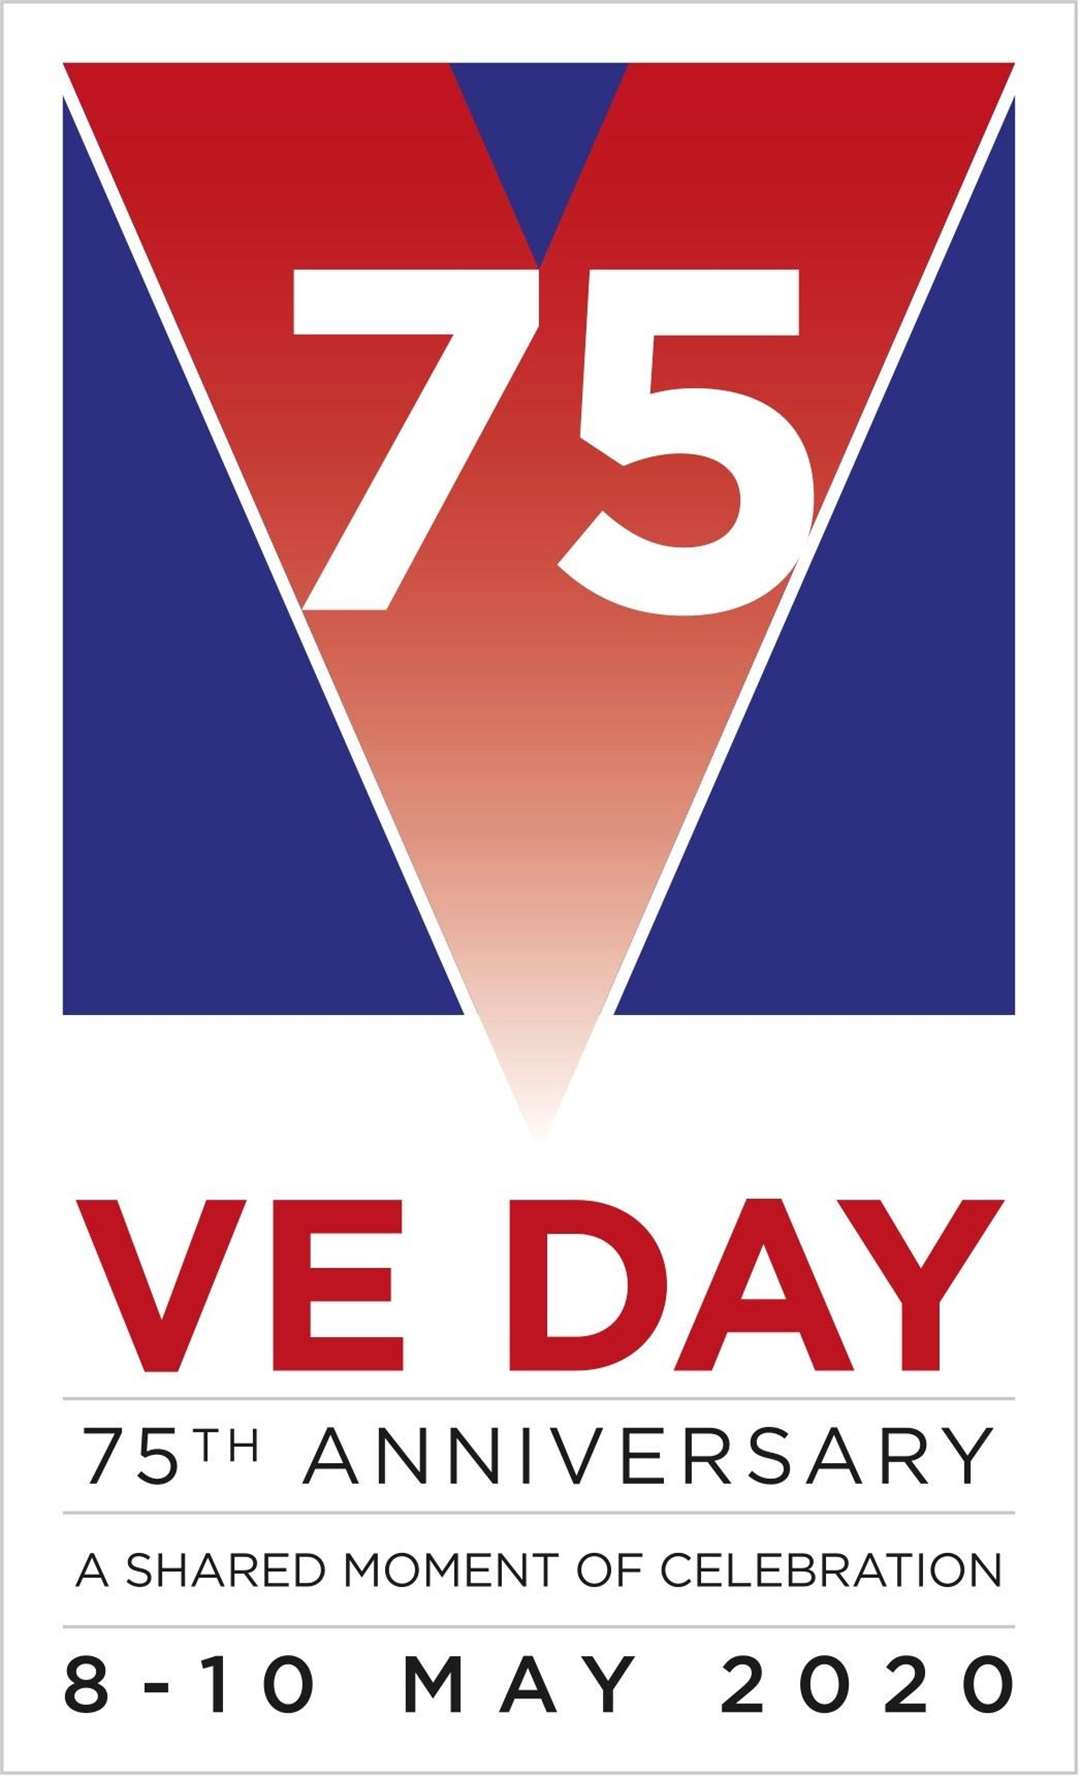 VE Day will be celebrated across the UK.